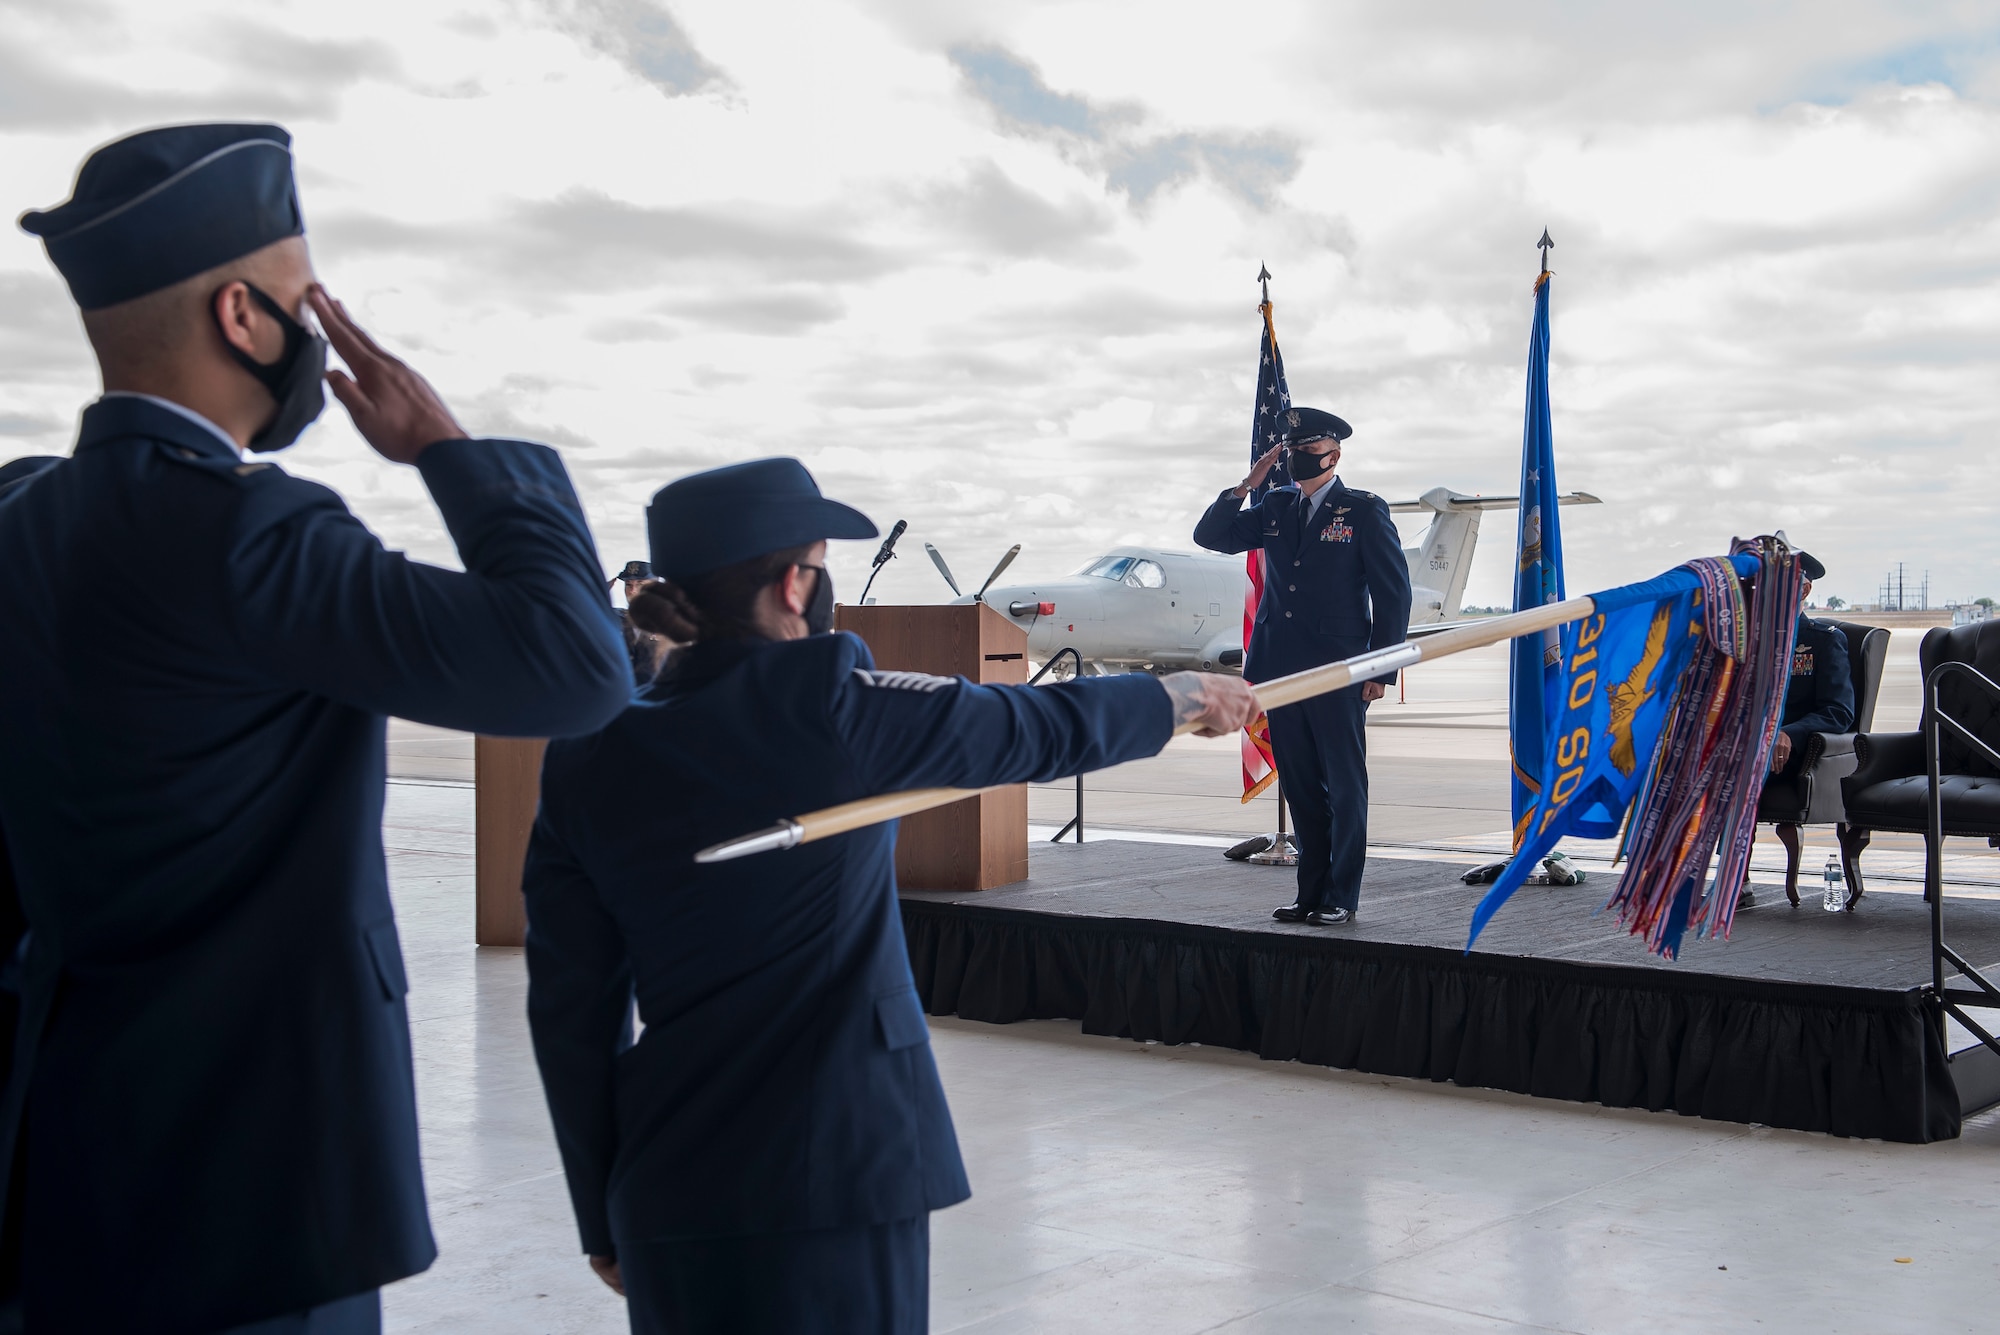 Members of the 310th Special Operations Squadron give Air Force Lt. Col. Joshua Stinson (right), 310 SOS commander, his first salute at the 310 SOS activation ceremony at Cannon Air Force Base, N.M., May 4, 2021. The 310 SOS was activated recently to align with the Air Force Special Operations Command’s new deployment plans, providing a more sustainable and predictable deployment cycle to allow Air Commandos more time at home station to develop themselves and the culture of the squadron. (U.S. Air Force photo by Senior Airman Vernon R. Walter III)